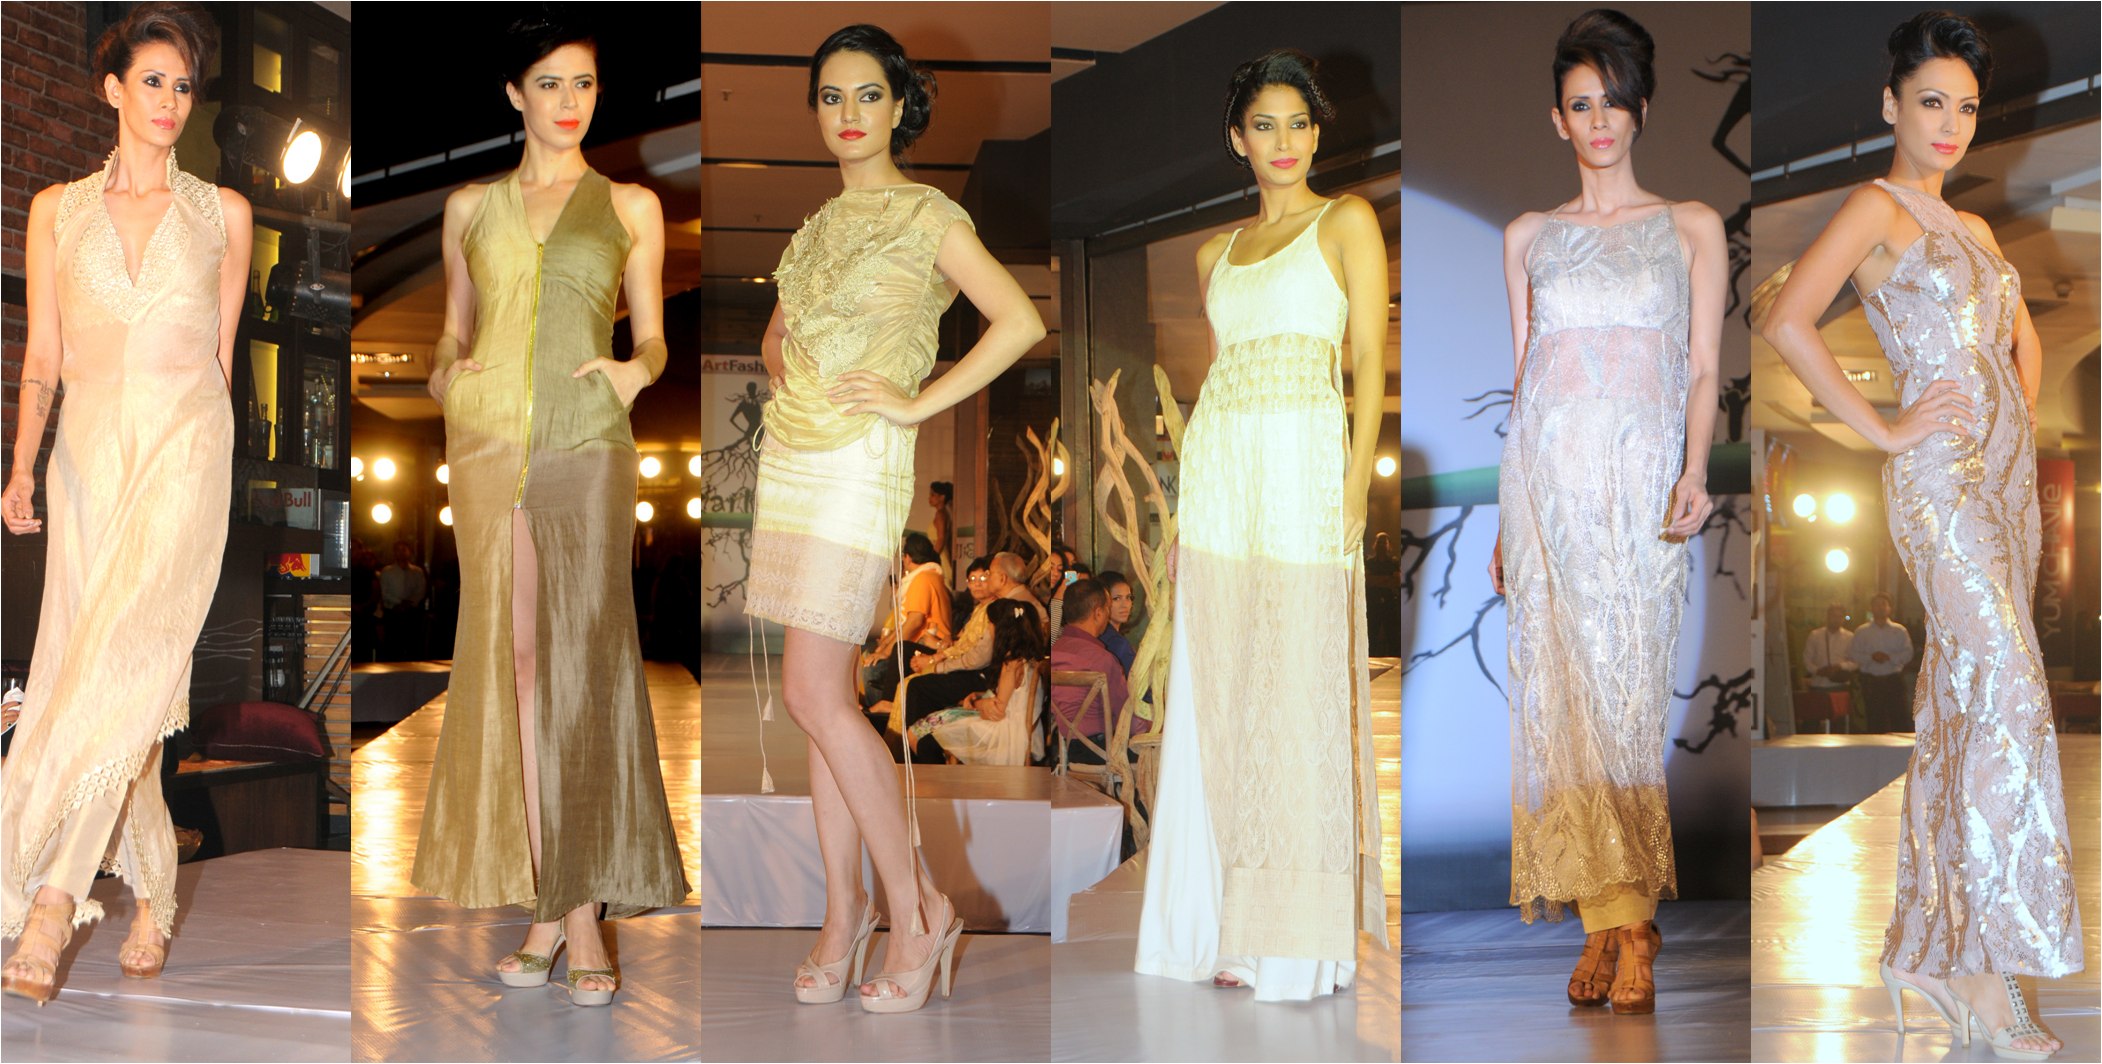 Amy Billimoria 's "Earth 21" Collection